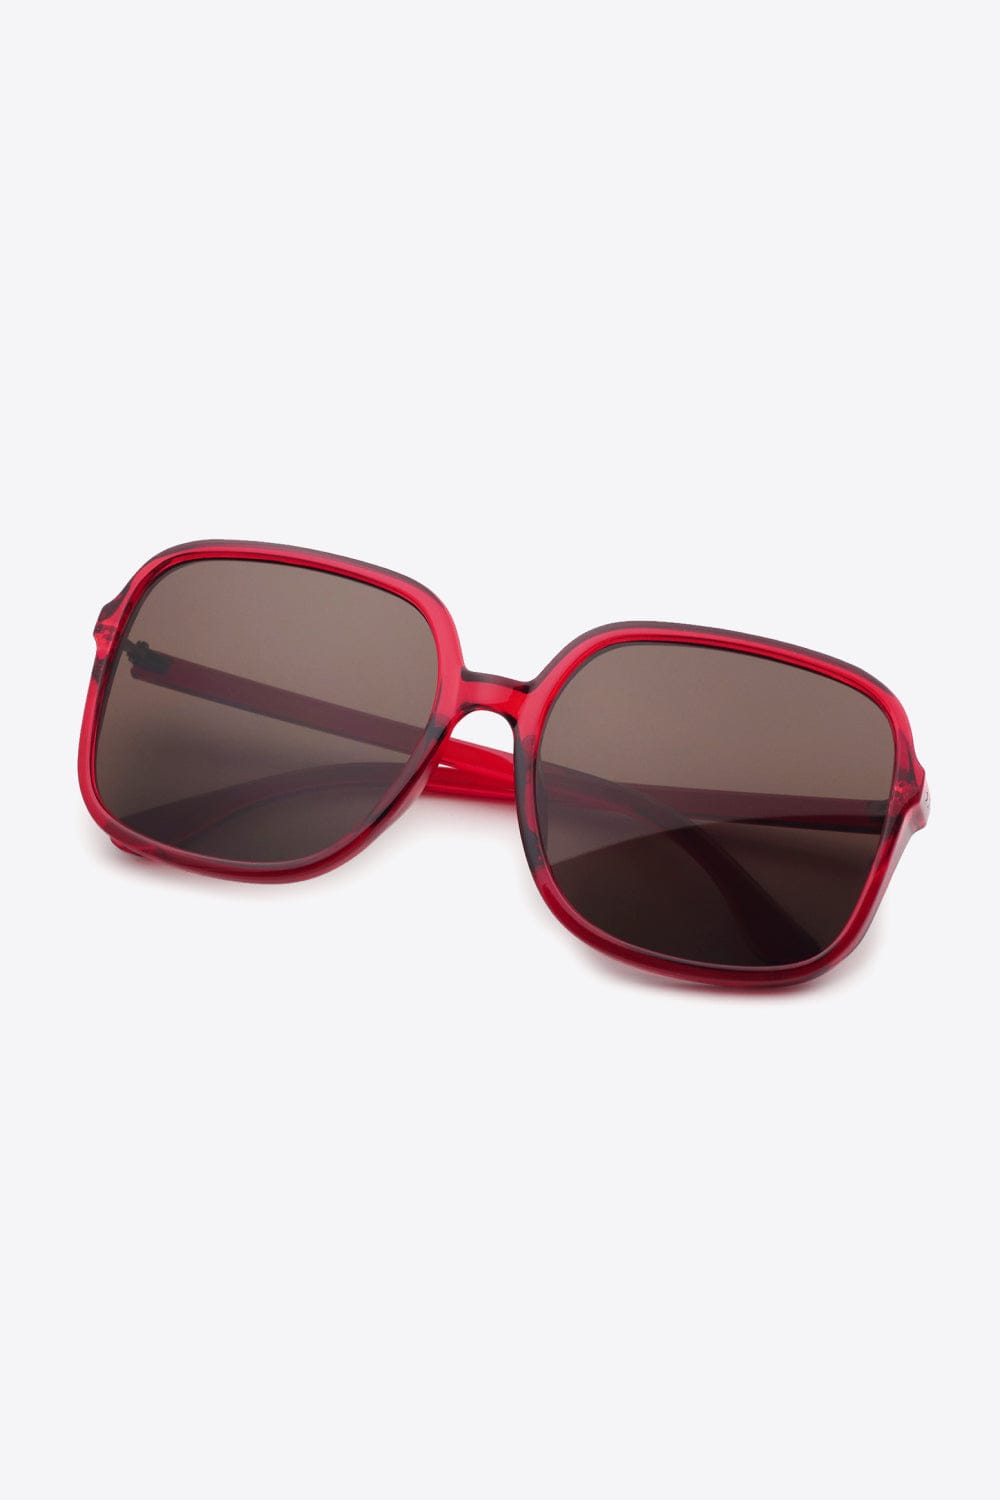 The802Gypsy sunglasses Red / One Size GYPSY-Polycarbonate Square Sunglasses